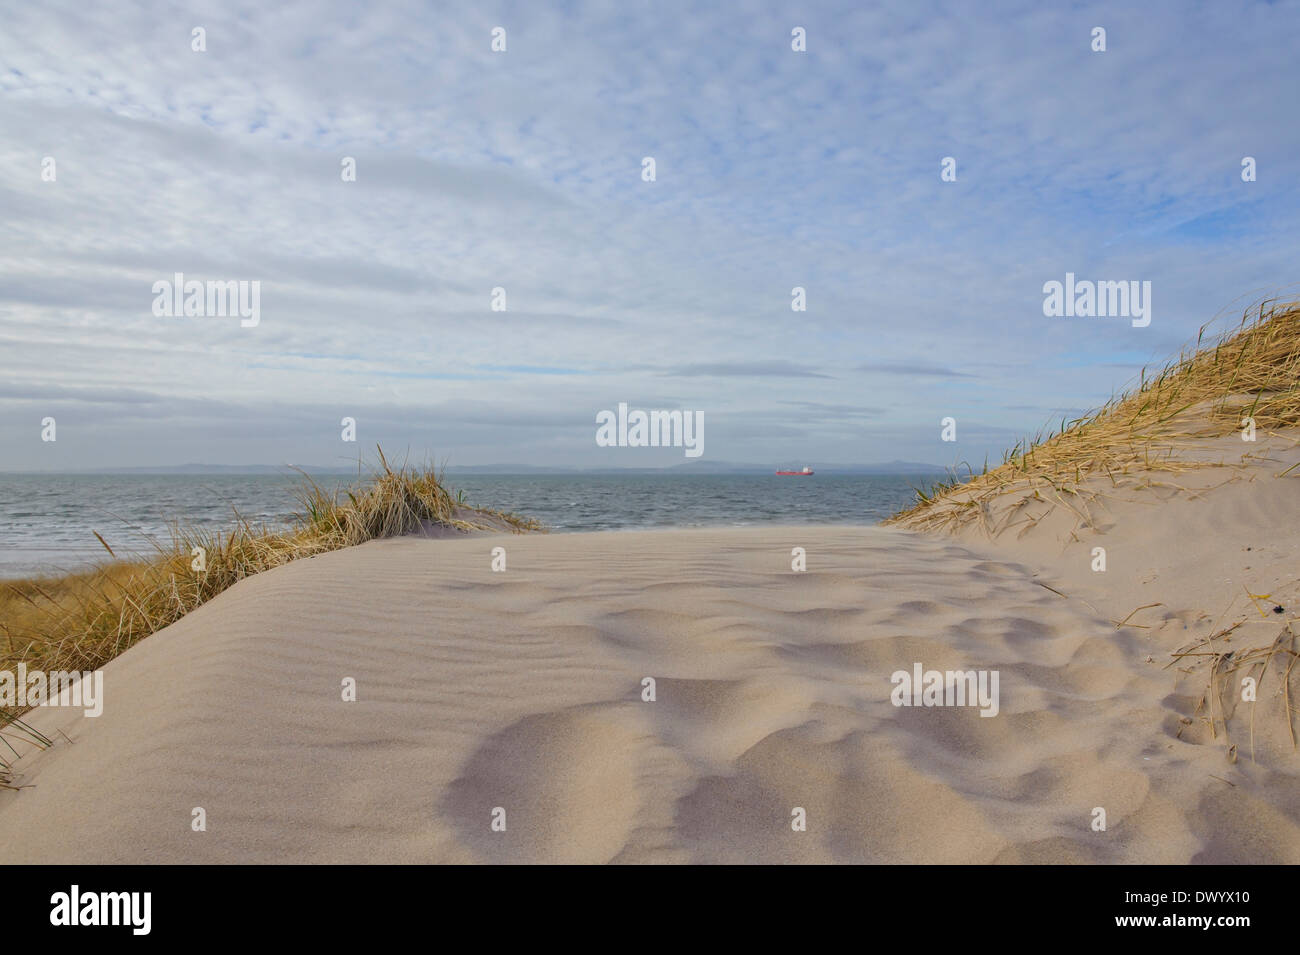 Sand dunes at Aberlady Bay, East Lothian, Scotland. Looking out to the Firth of Forth. Stock Photo